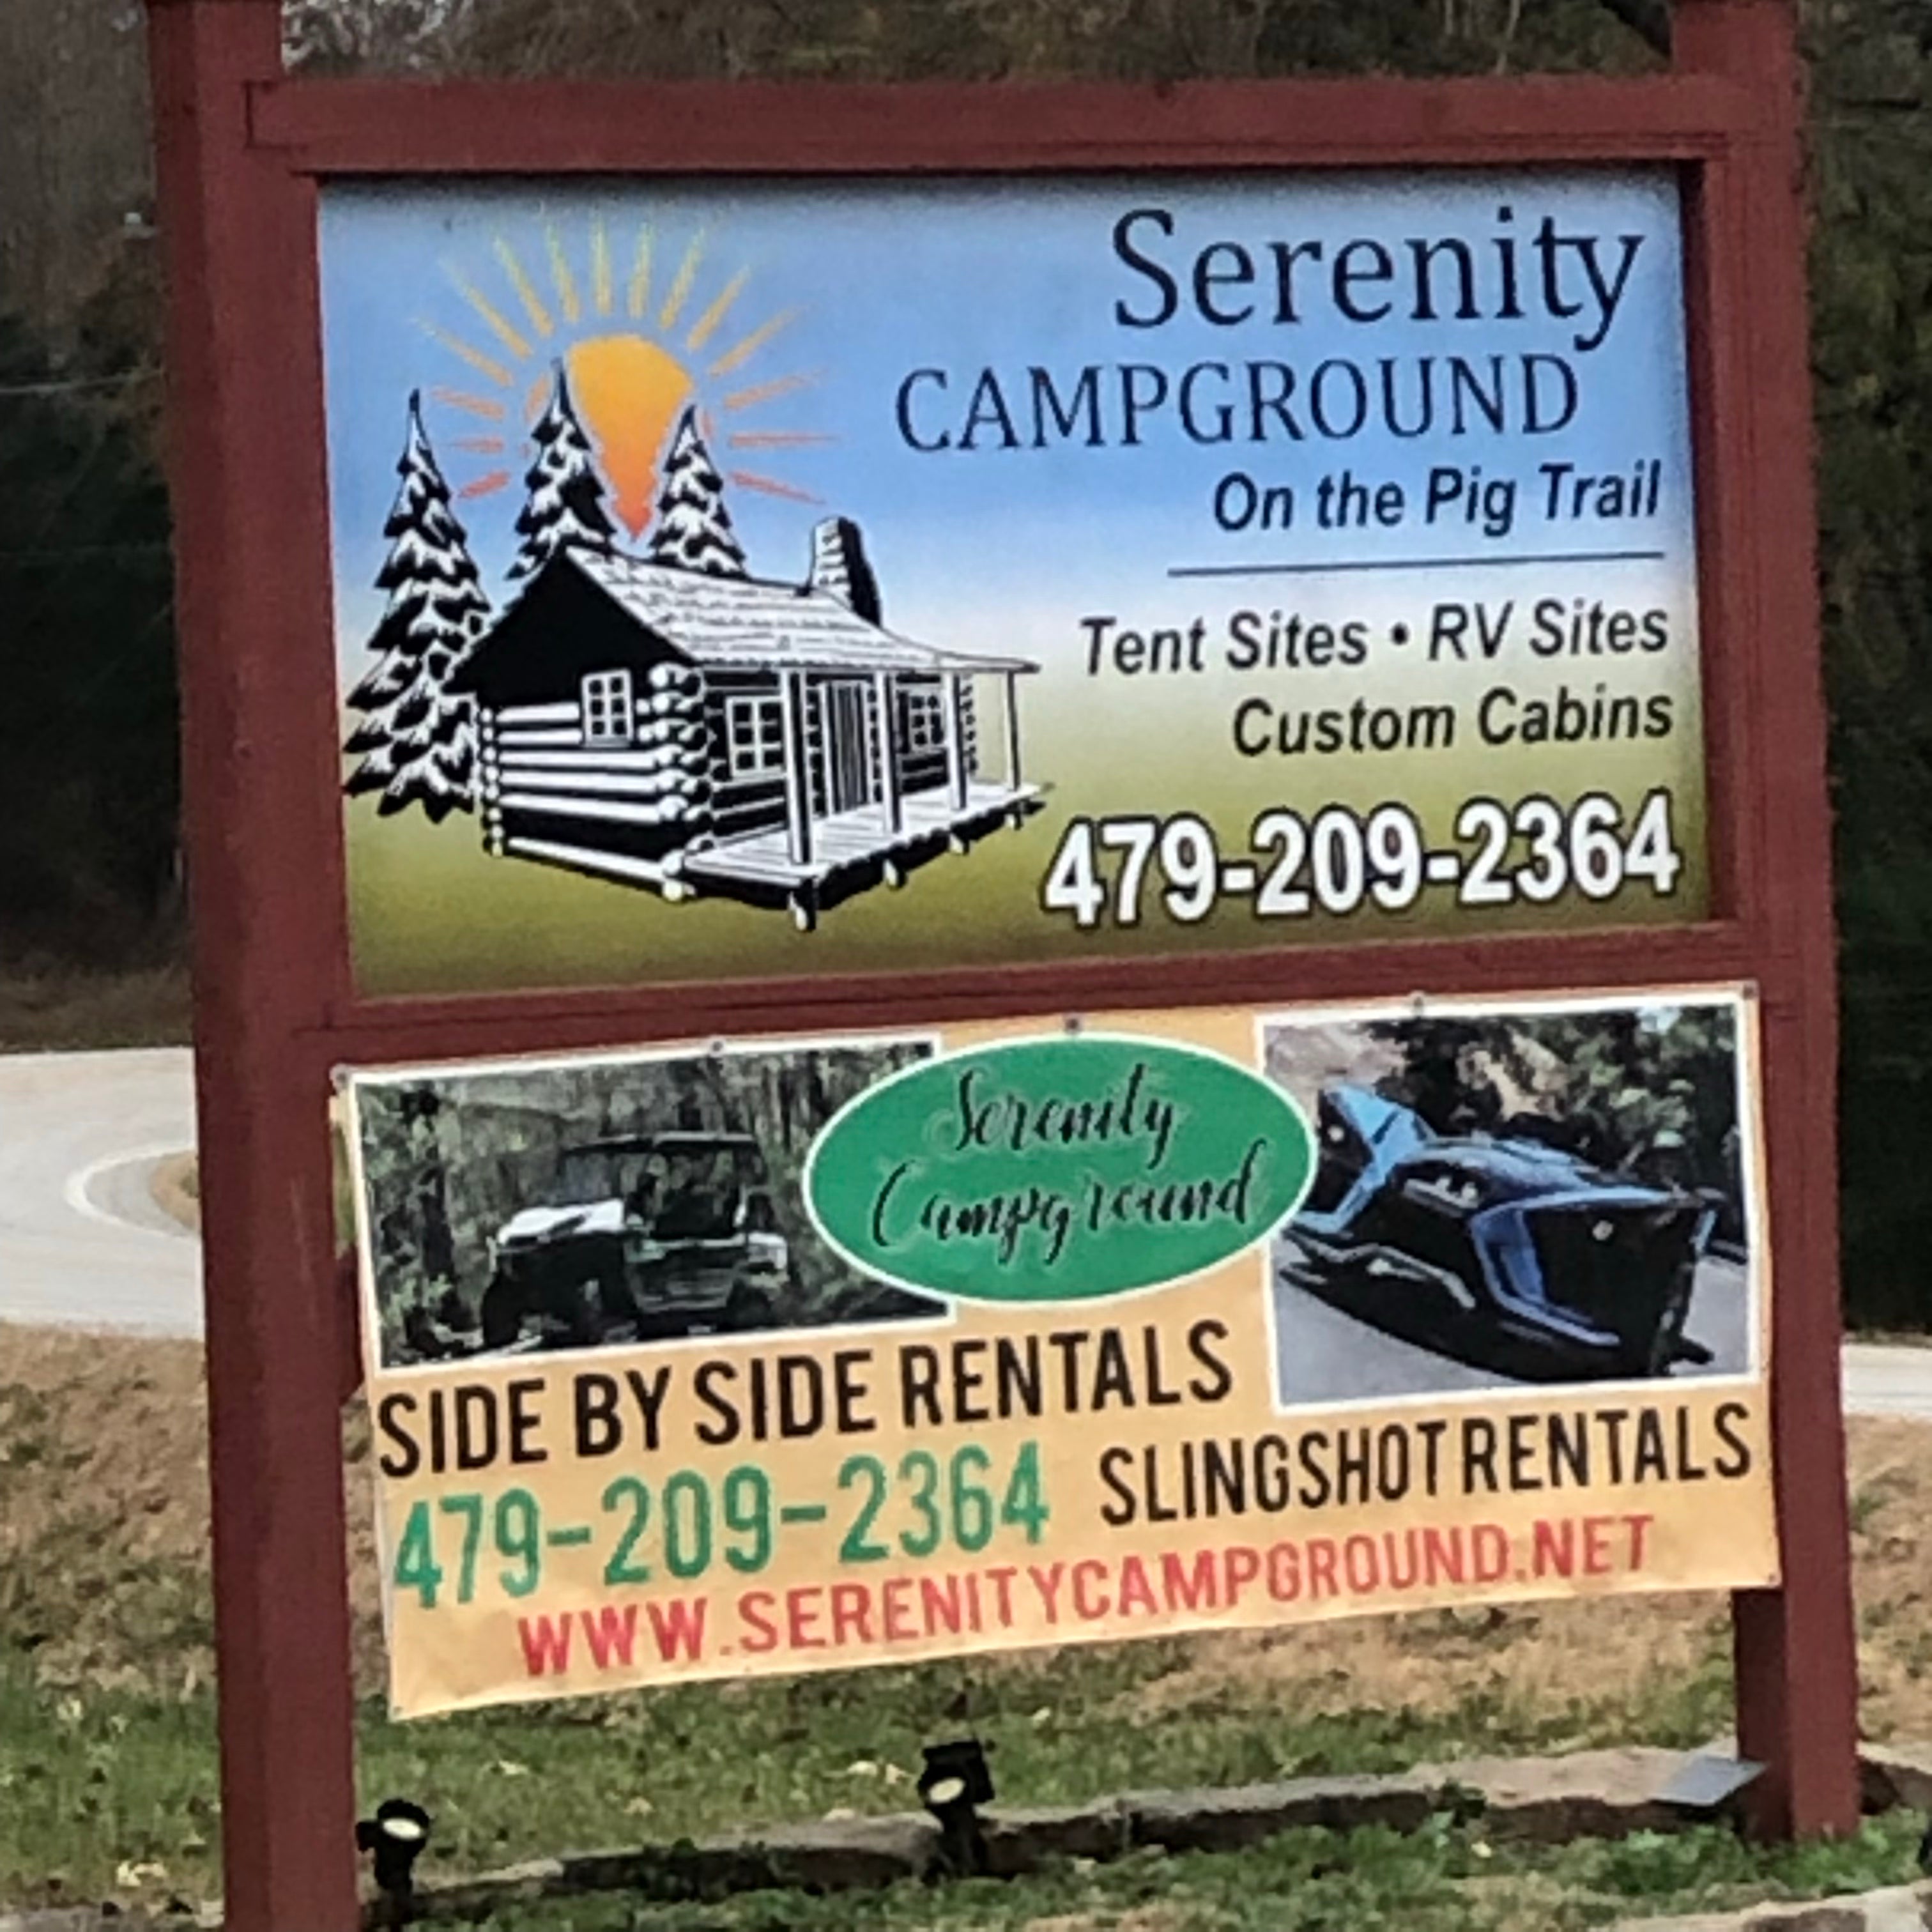 Camper submitted image from Serenity Campground - 4